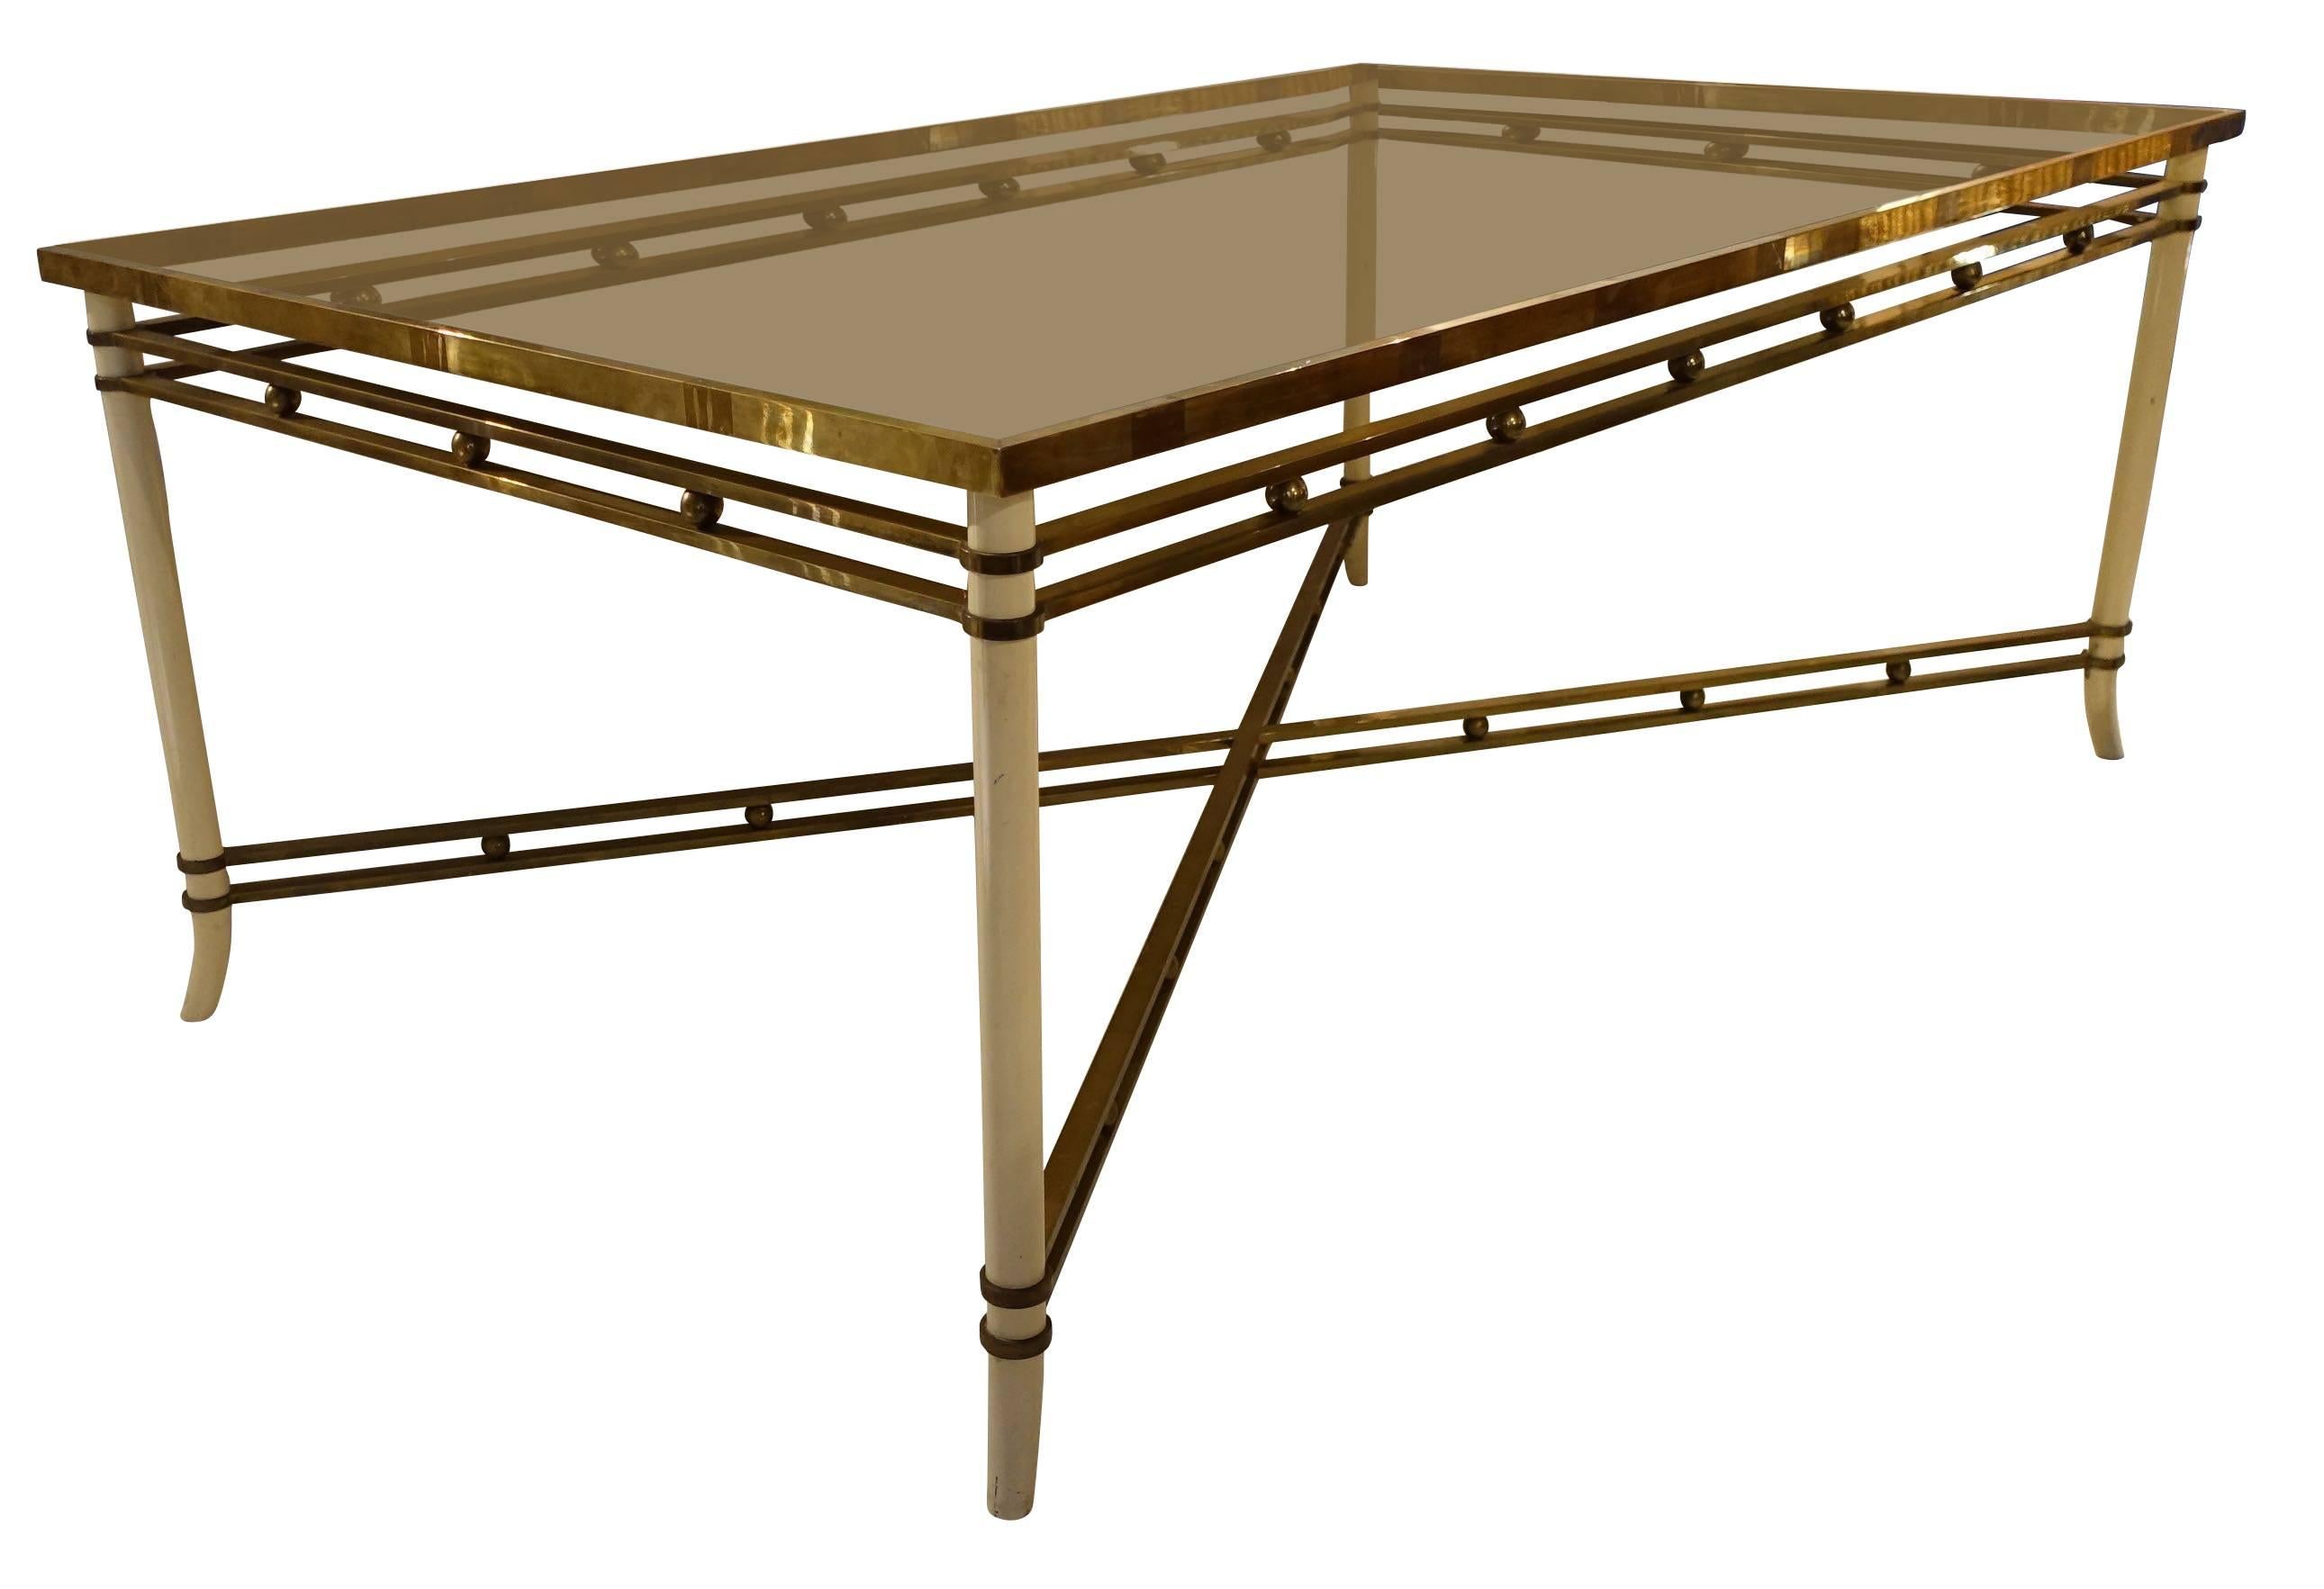 Midcentury French cream colored metal legs with brass details dining table.
Smoked taupe glass top.
Decorative small brass balls are placed along the apron as well as the cross stretcher of table.
Glass top has minor scratches due to age and use.